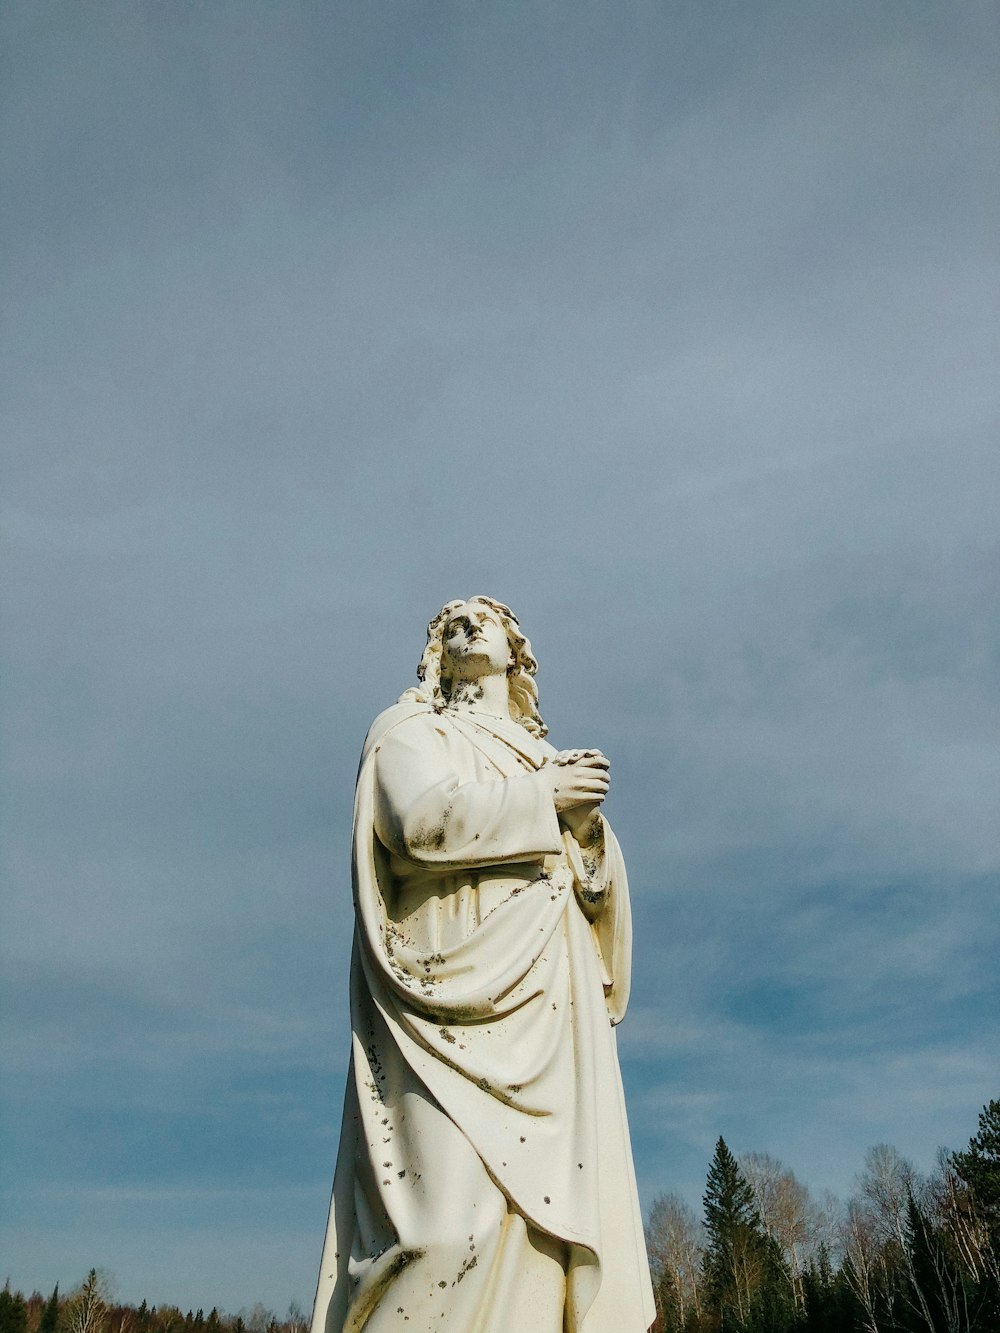 a large white statue of a man with a beard